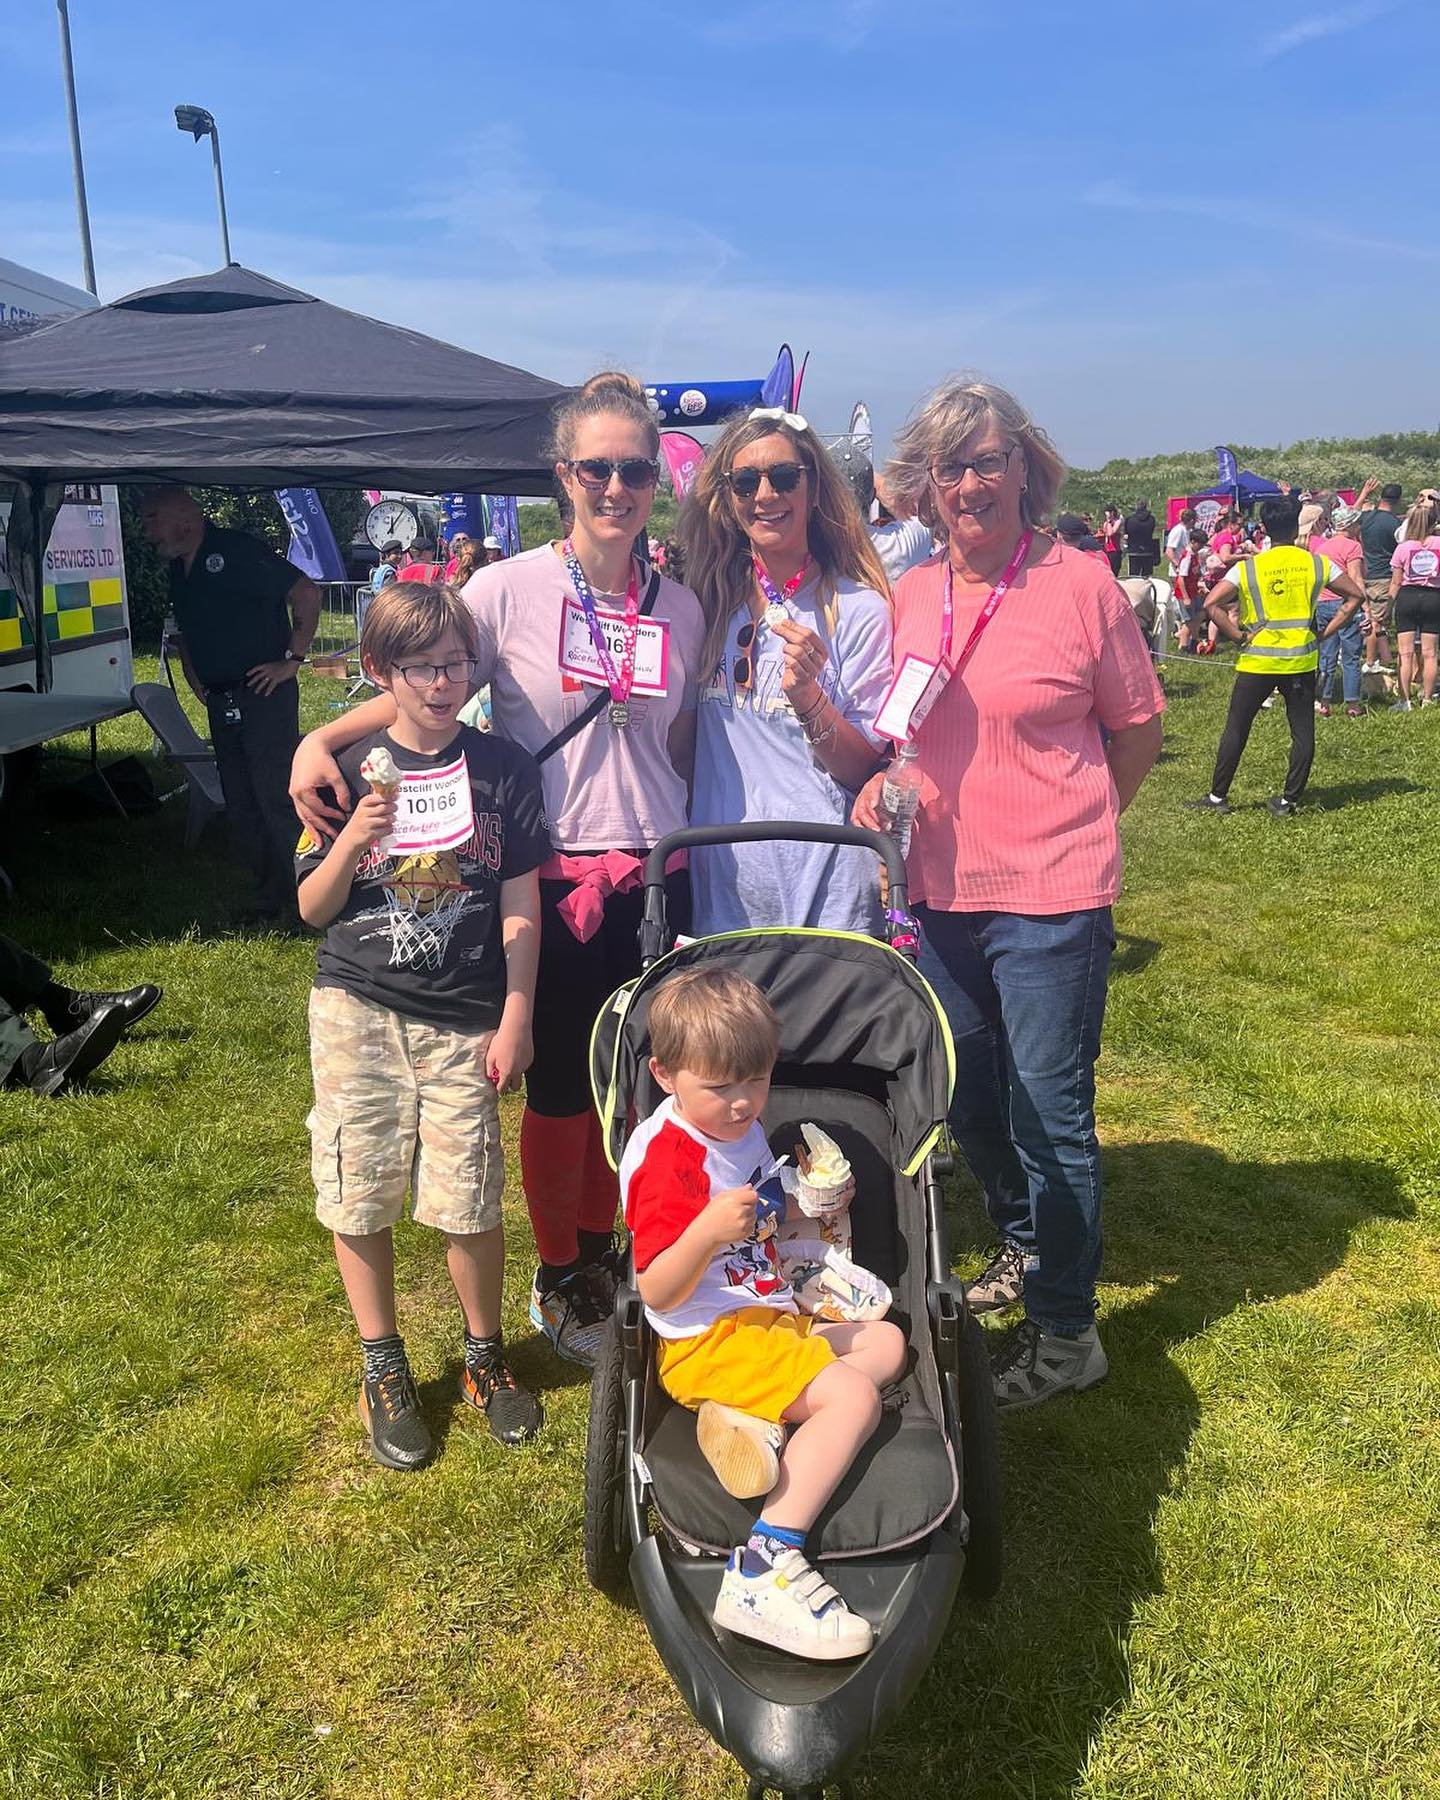 On Sunday my family and I took part in the @cr_uk Cancer Research 5k Race for Life at Garon&rsquo;s Park - including my mum who is now 82?!?! (she walked btw!).

We lost two of our closest friends to cancer in recent years so wanted to do it for them